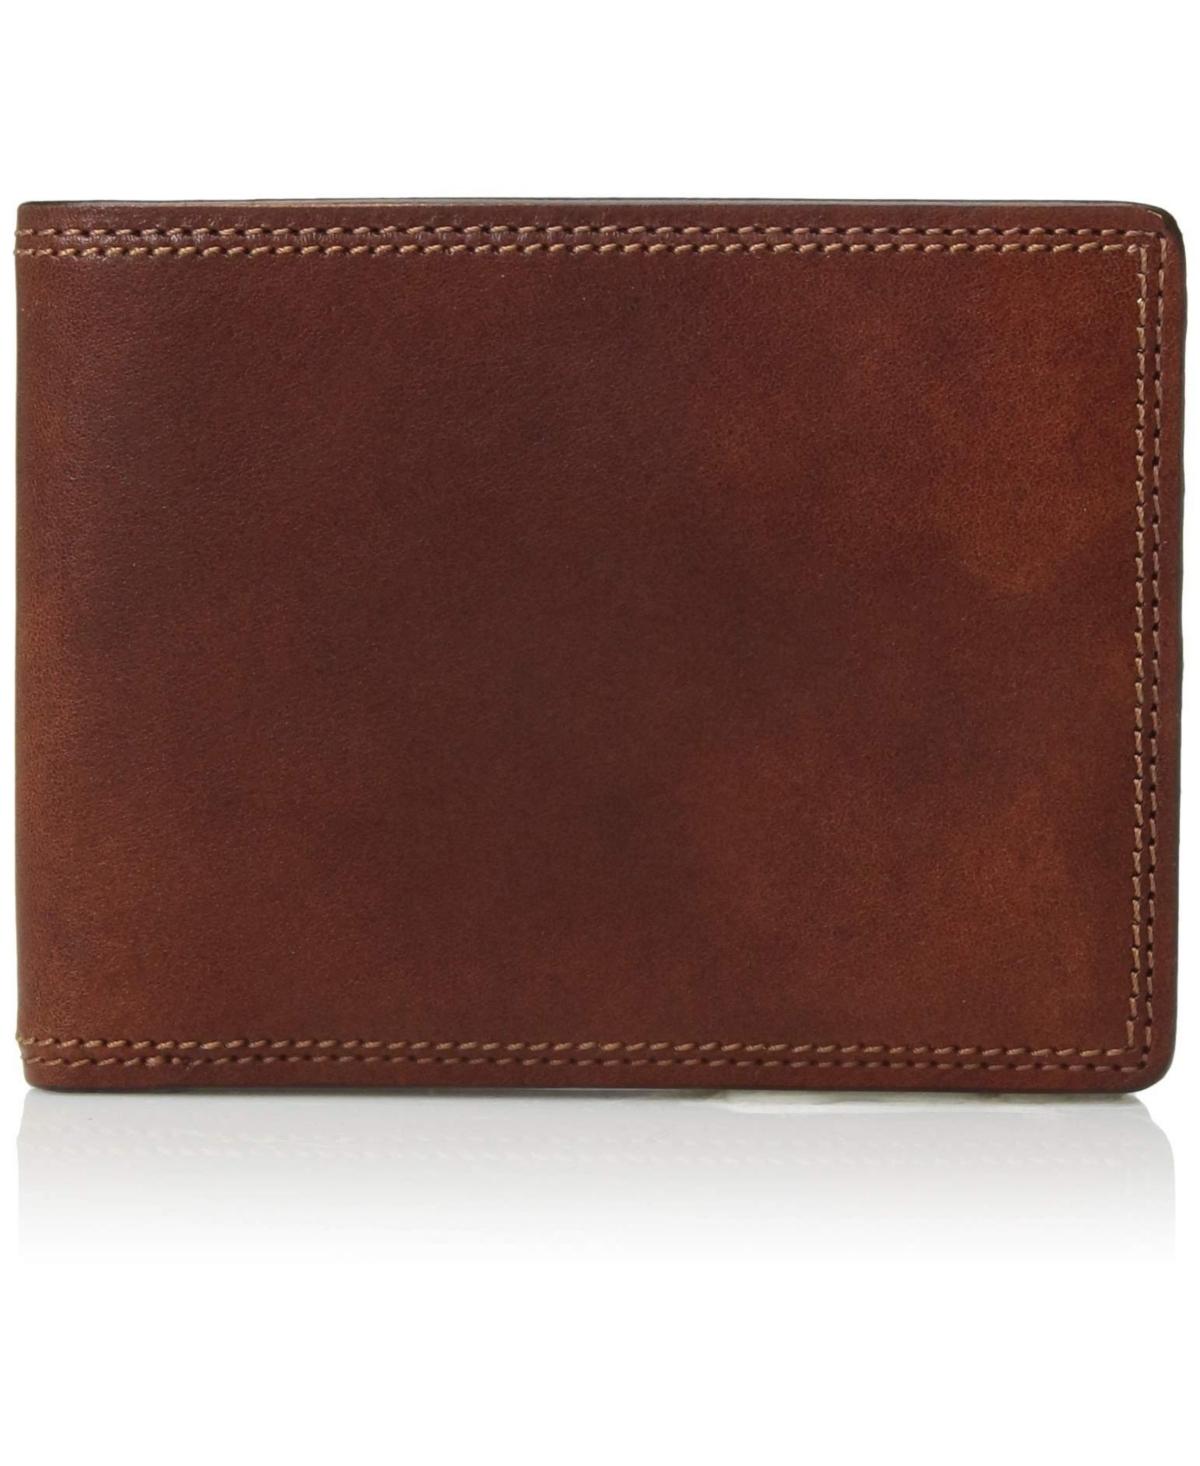 Men's Executive Wallet in Dolce Leather - Rfid - Amber